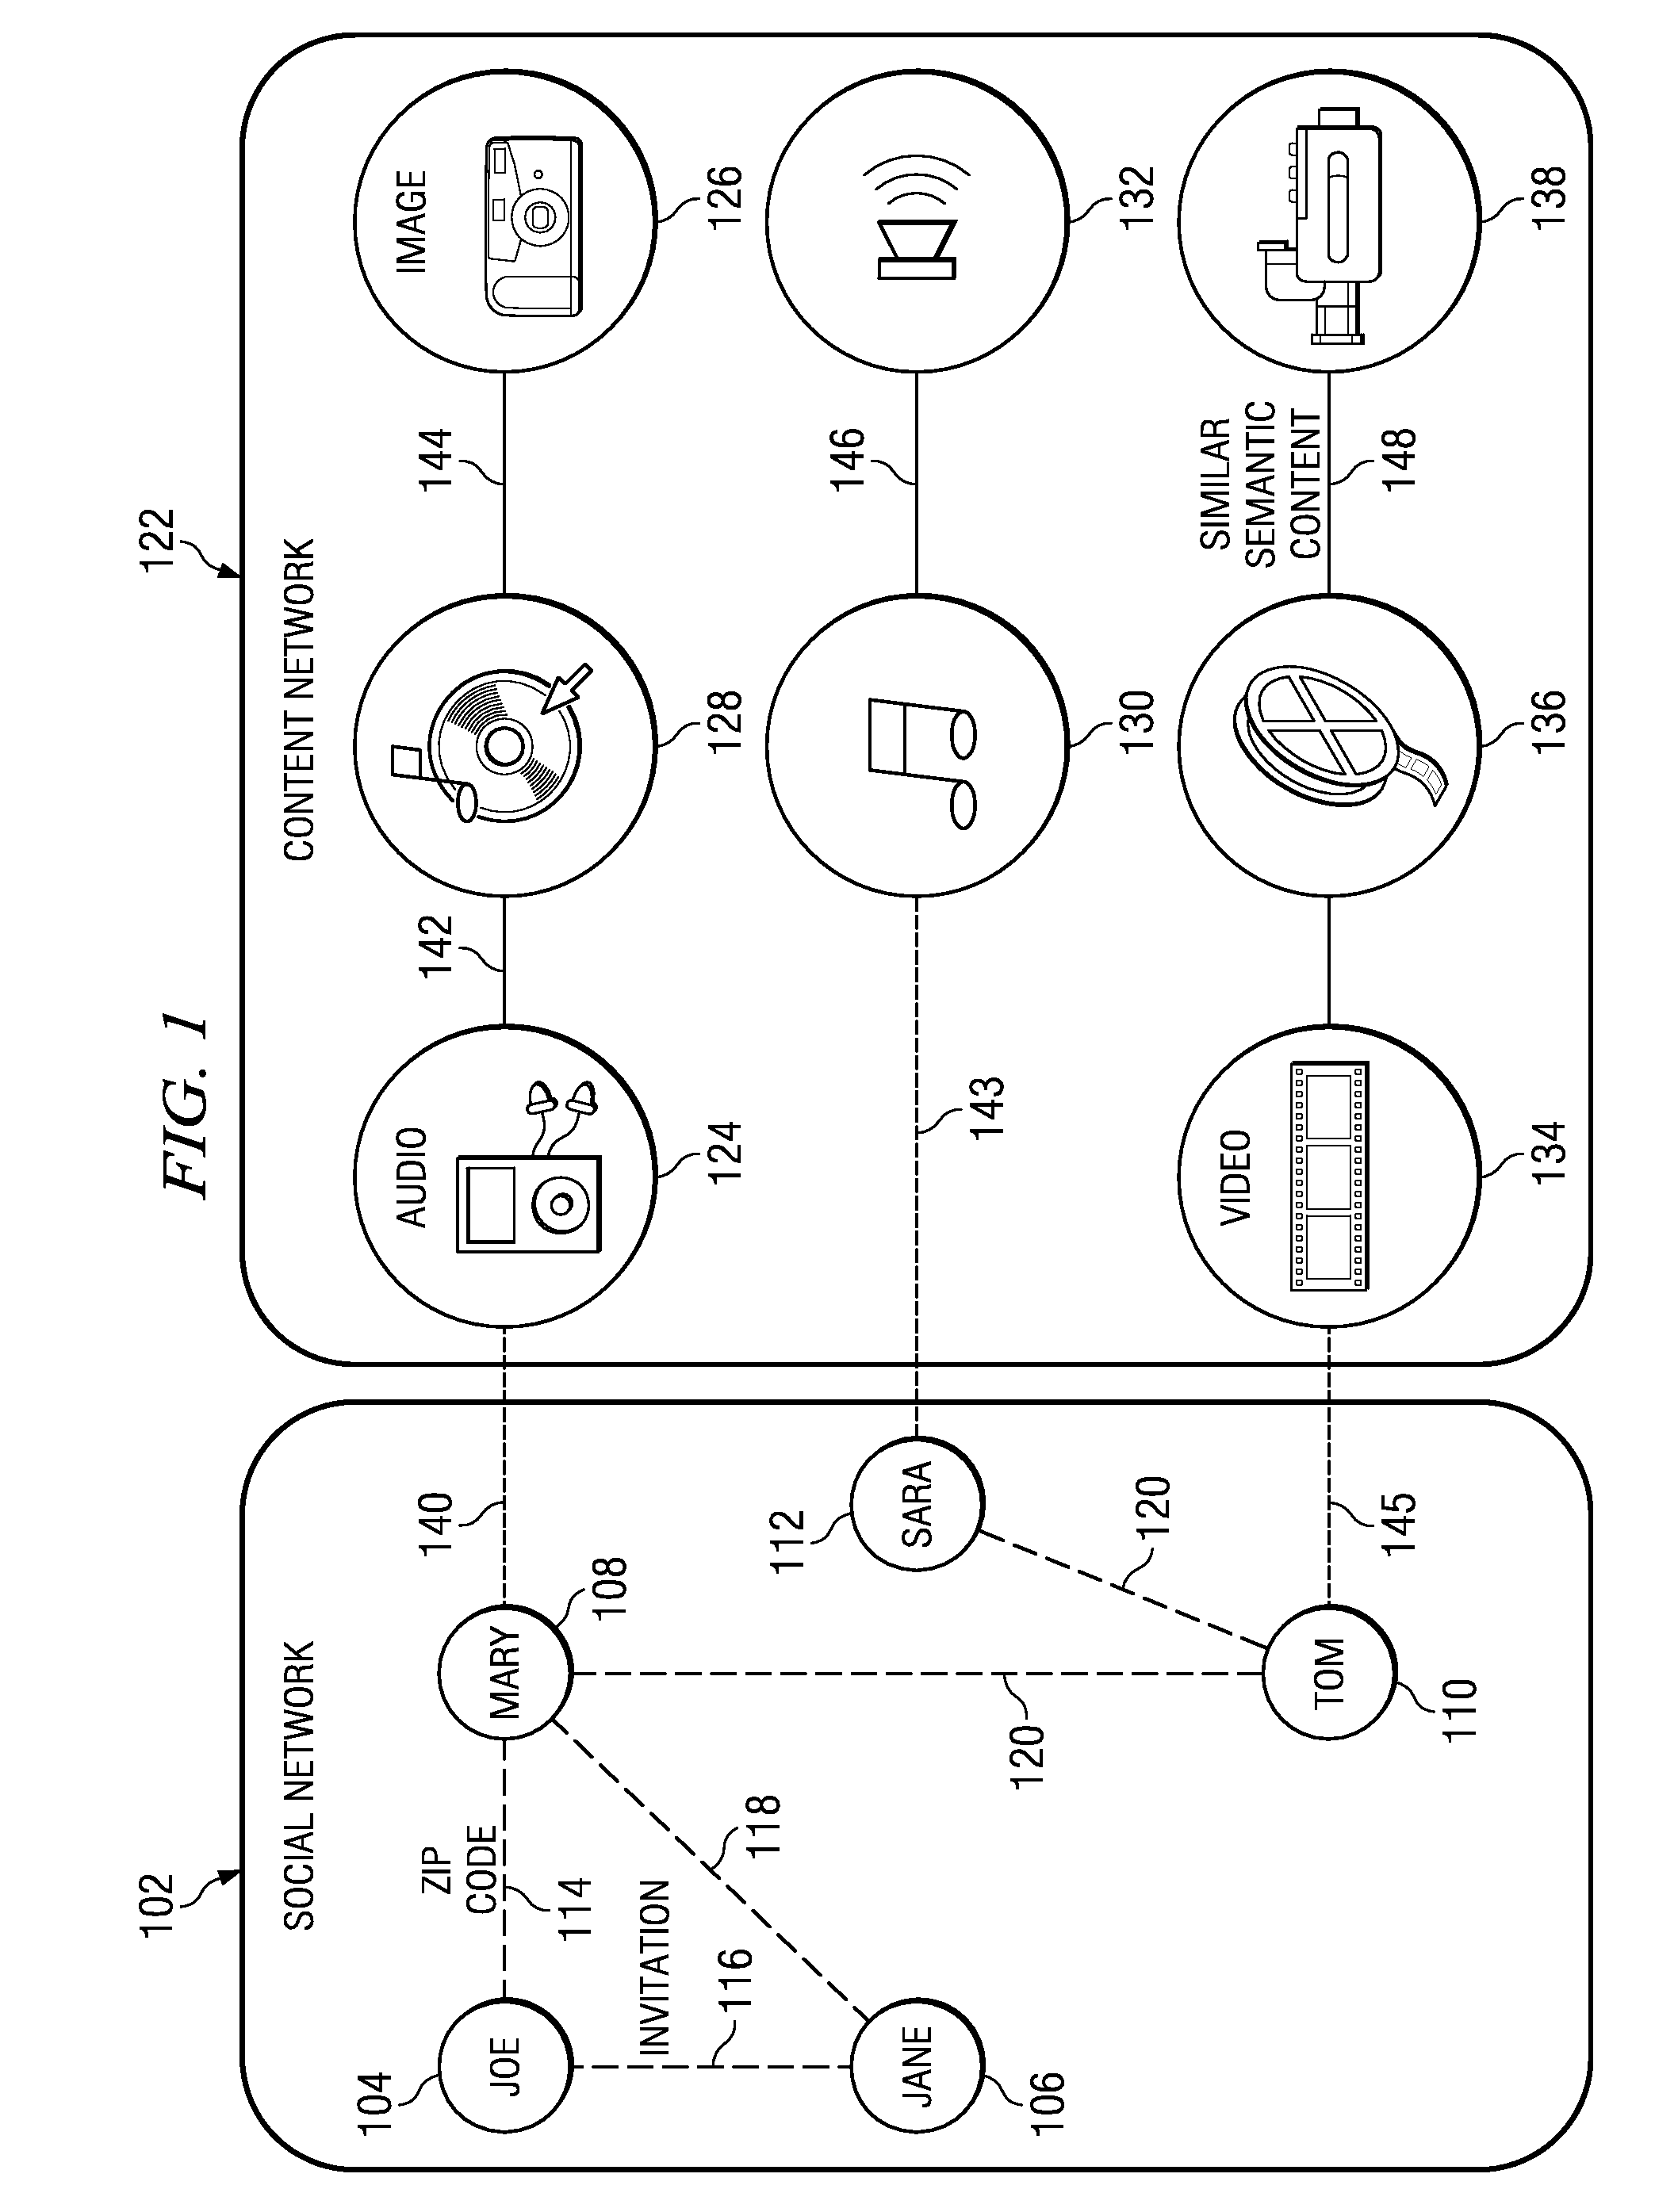 Method and apparatus for joint analysis of social and content networks